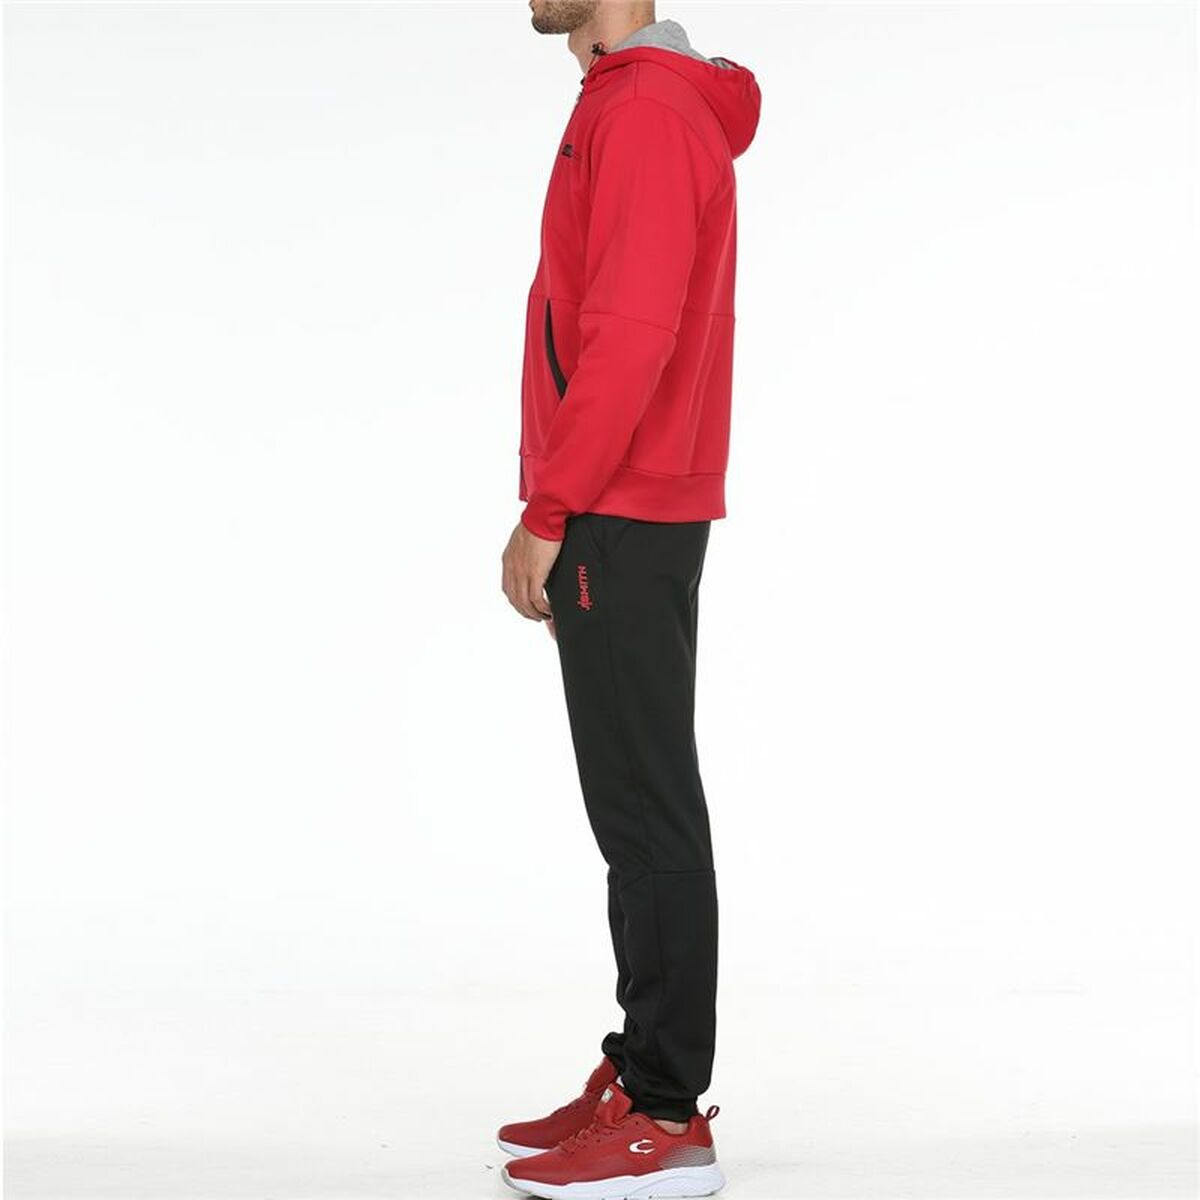 Tracksuit for Adults John Smith Krien Red